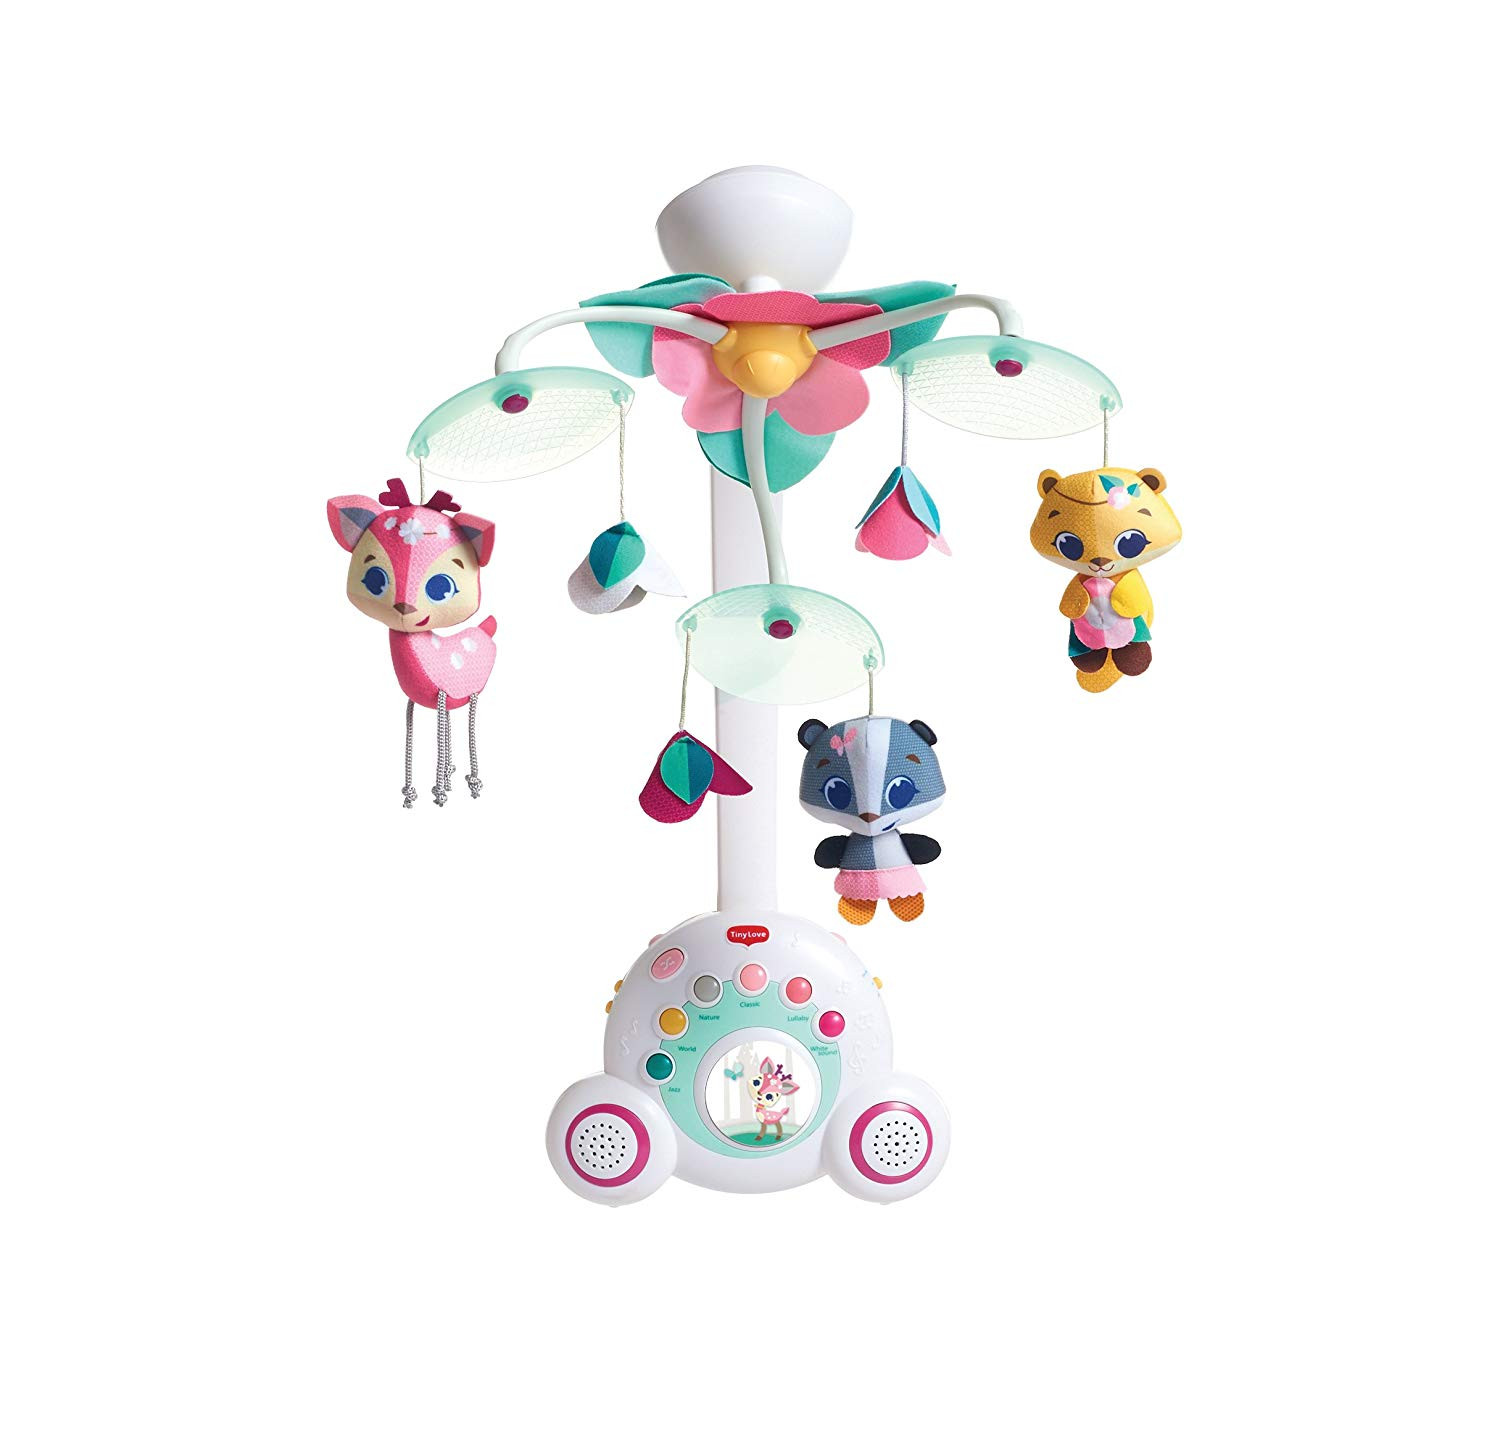 Giostrina Tiny Love Soothe'n Groove Mobile - In Offrta